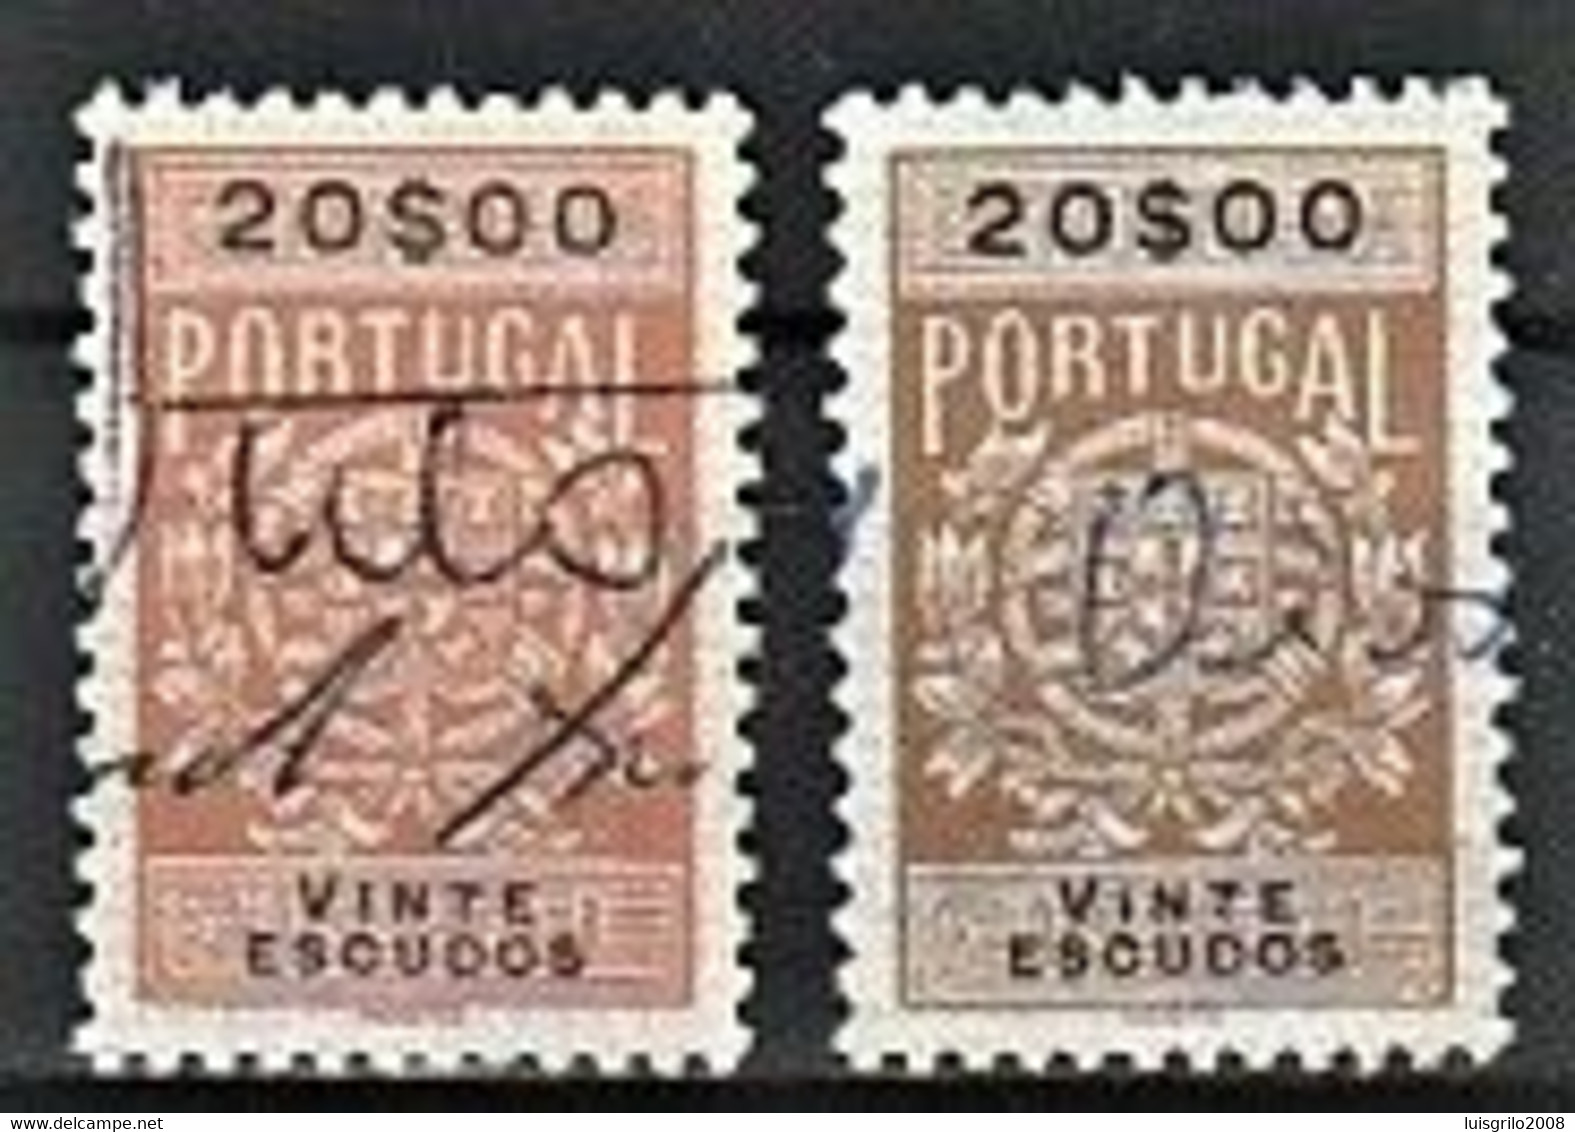 Fiscal/ Revenue, Portugal 1940 - Estampilha Fiscal -|- 20$00 - COLOR VARIANT - Is The Stamp Of The Right - Used Stamps